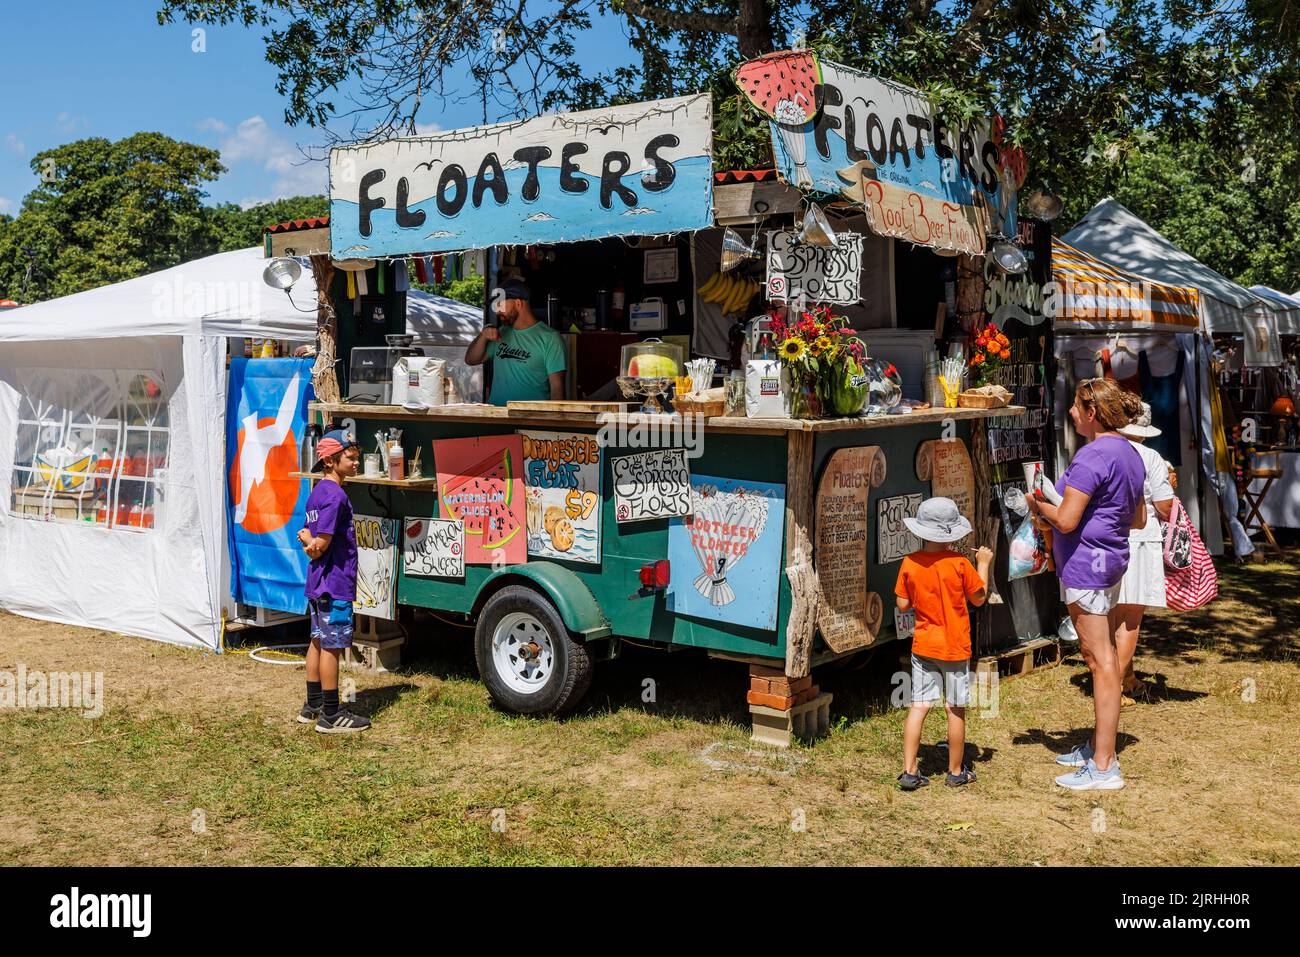 A local business sells root beer floats at the 2022 Martha's Vineyard Agricultural Society Fair in West Tisbury, Massachusetts on Martha's Vineyard. Stock Photo